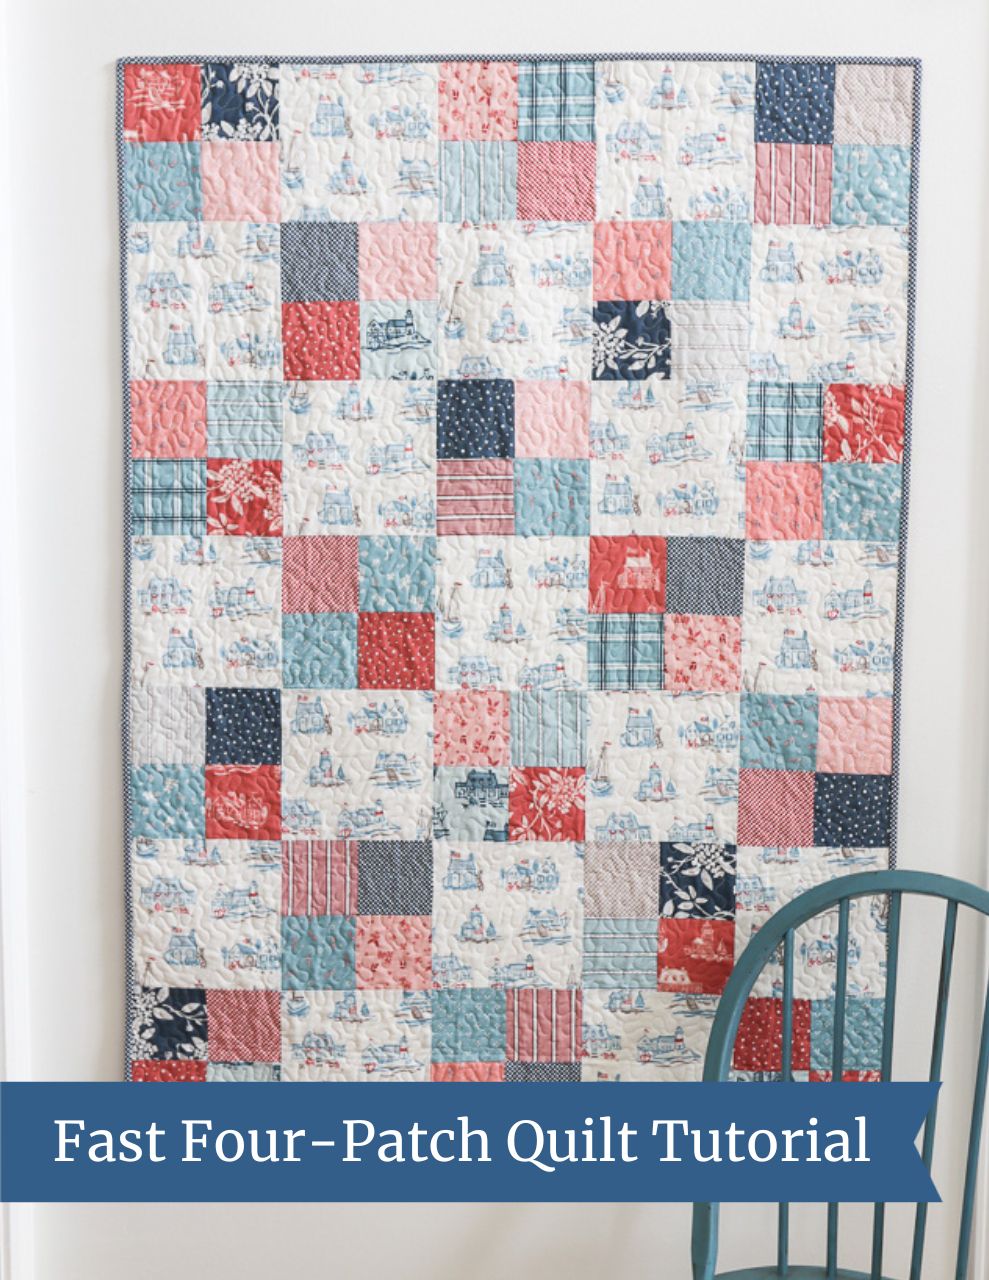 Fast Four Patch Quilt Tutorial - Diary of a Quilter